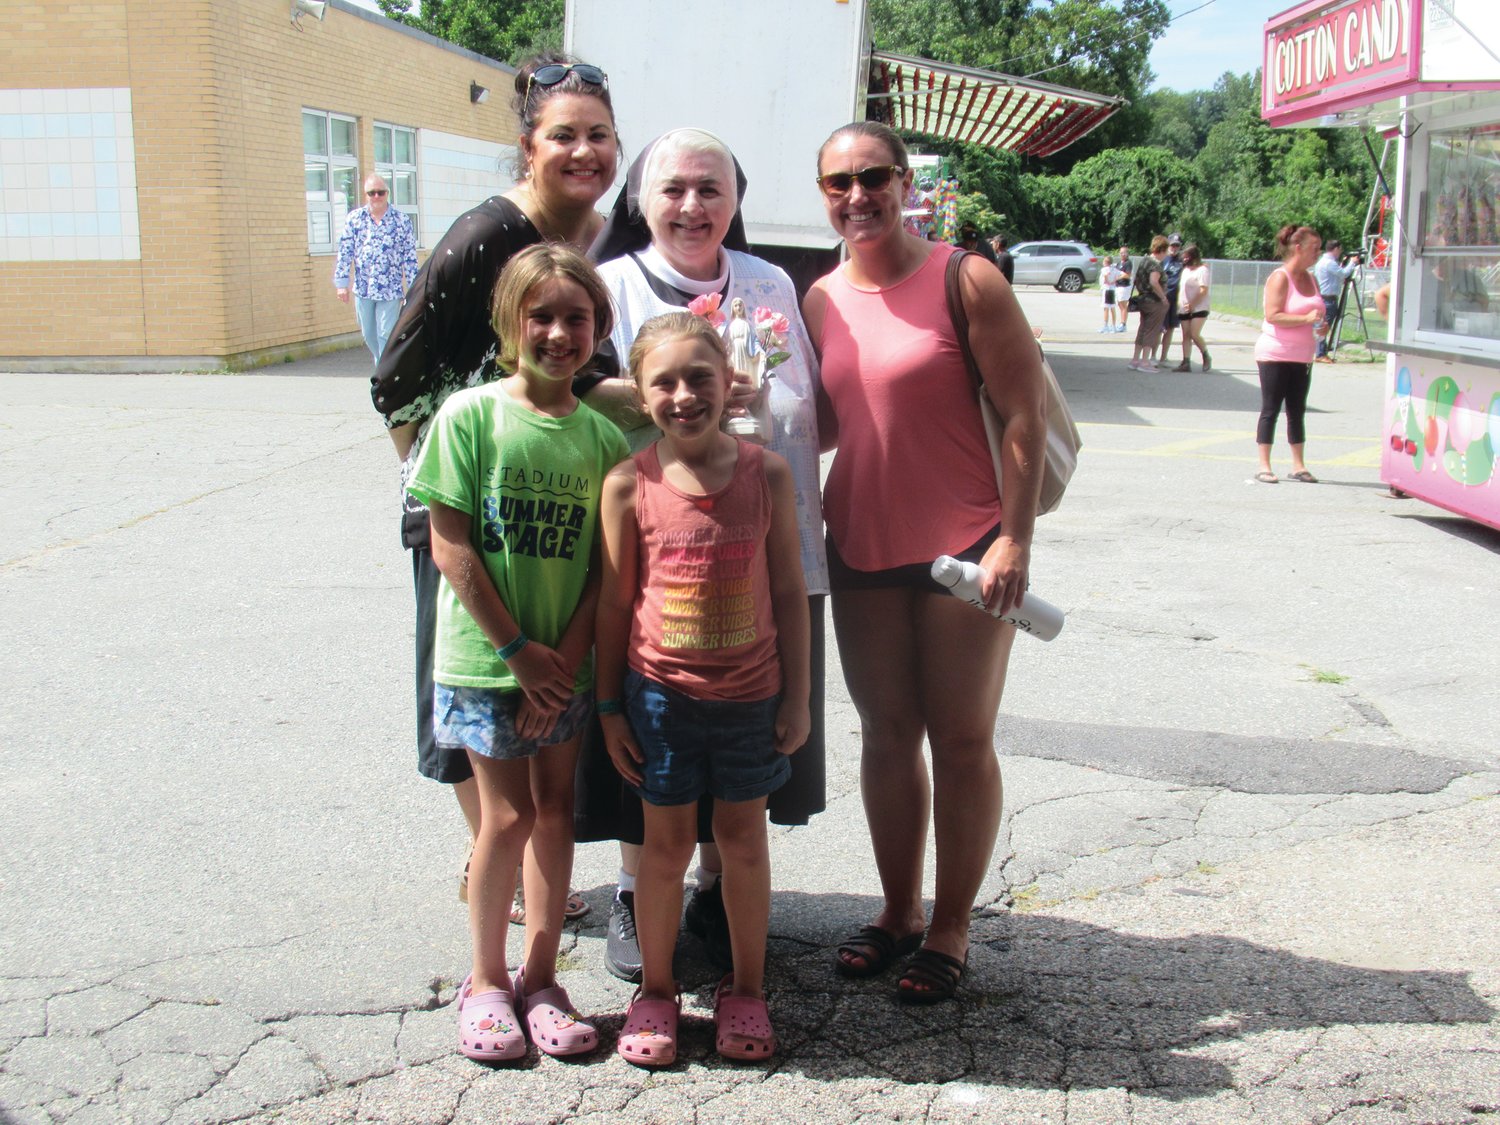 FAMILY FRIEND: Sister Donna welcomes the Berube family – Caroline, Abigail, and Stacie were among her many Saint Rocco’s friends that enjoyed the annual feast and festival.